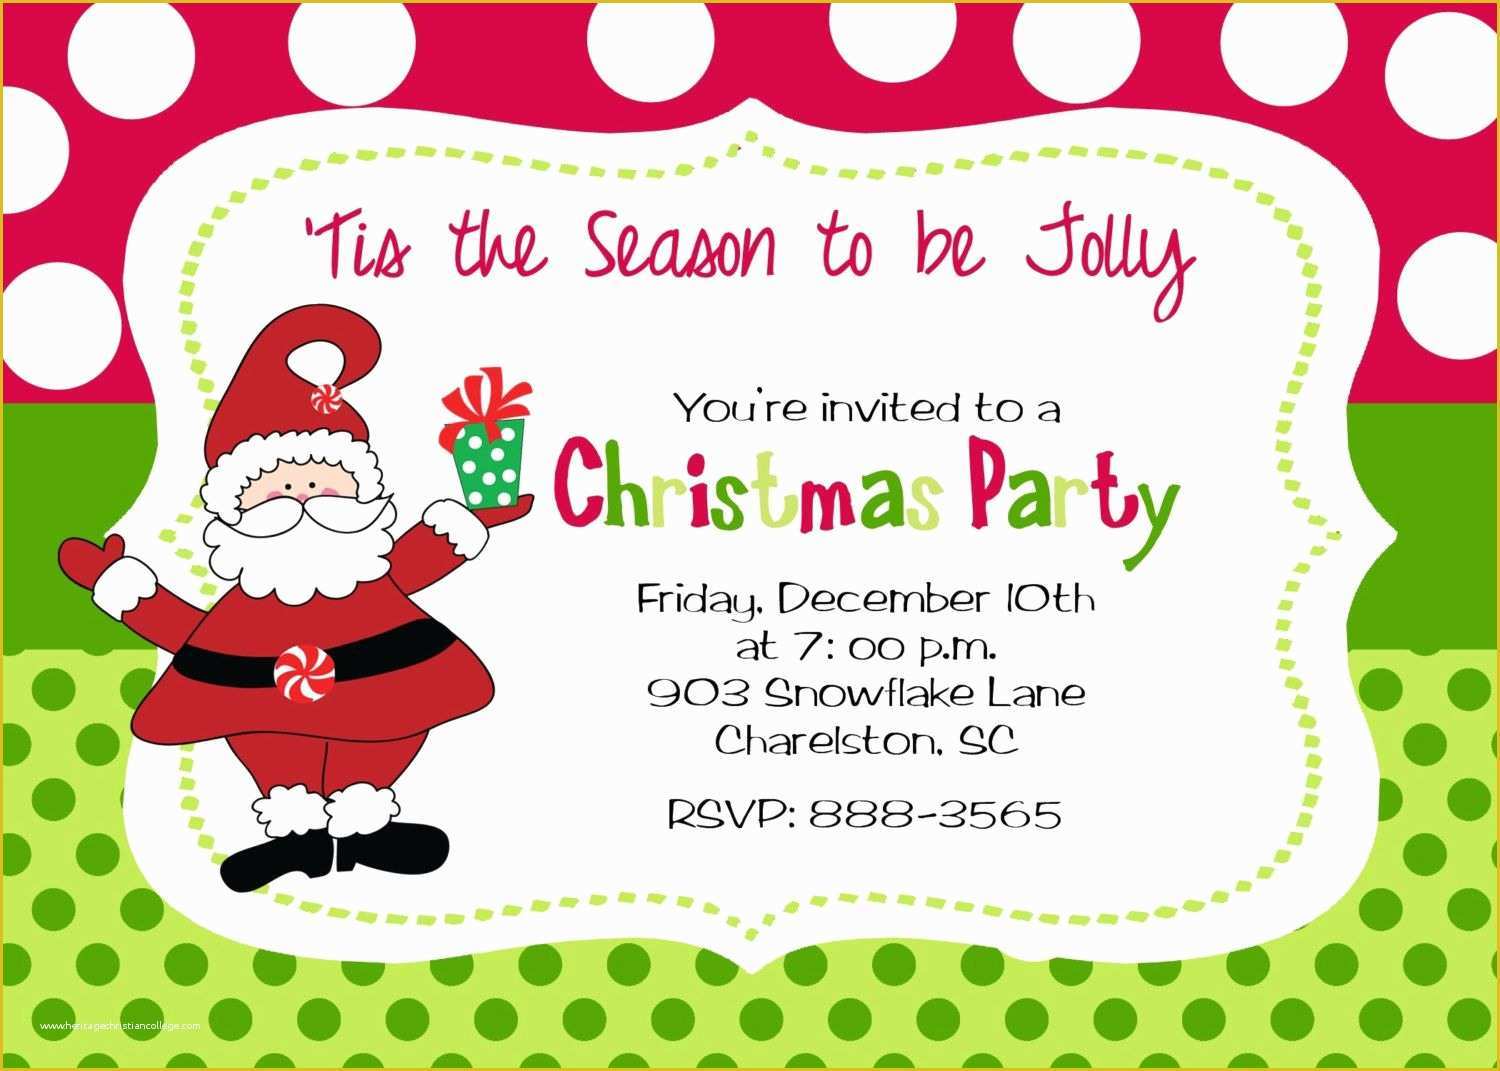 Holiday Party Templates Free Of Christmas Party Invitation by Stickerchic Etsy